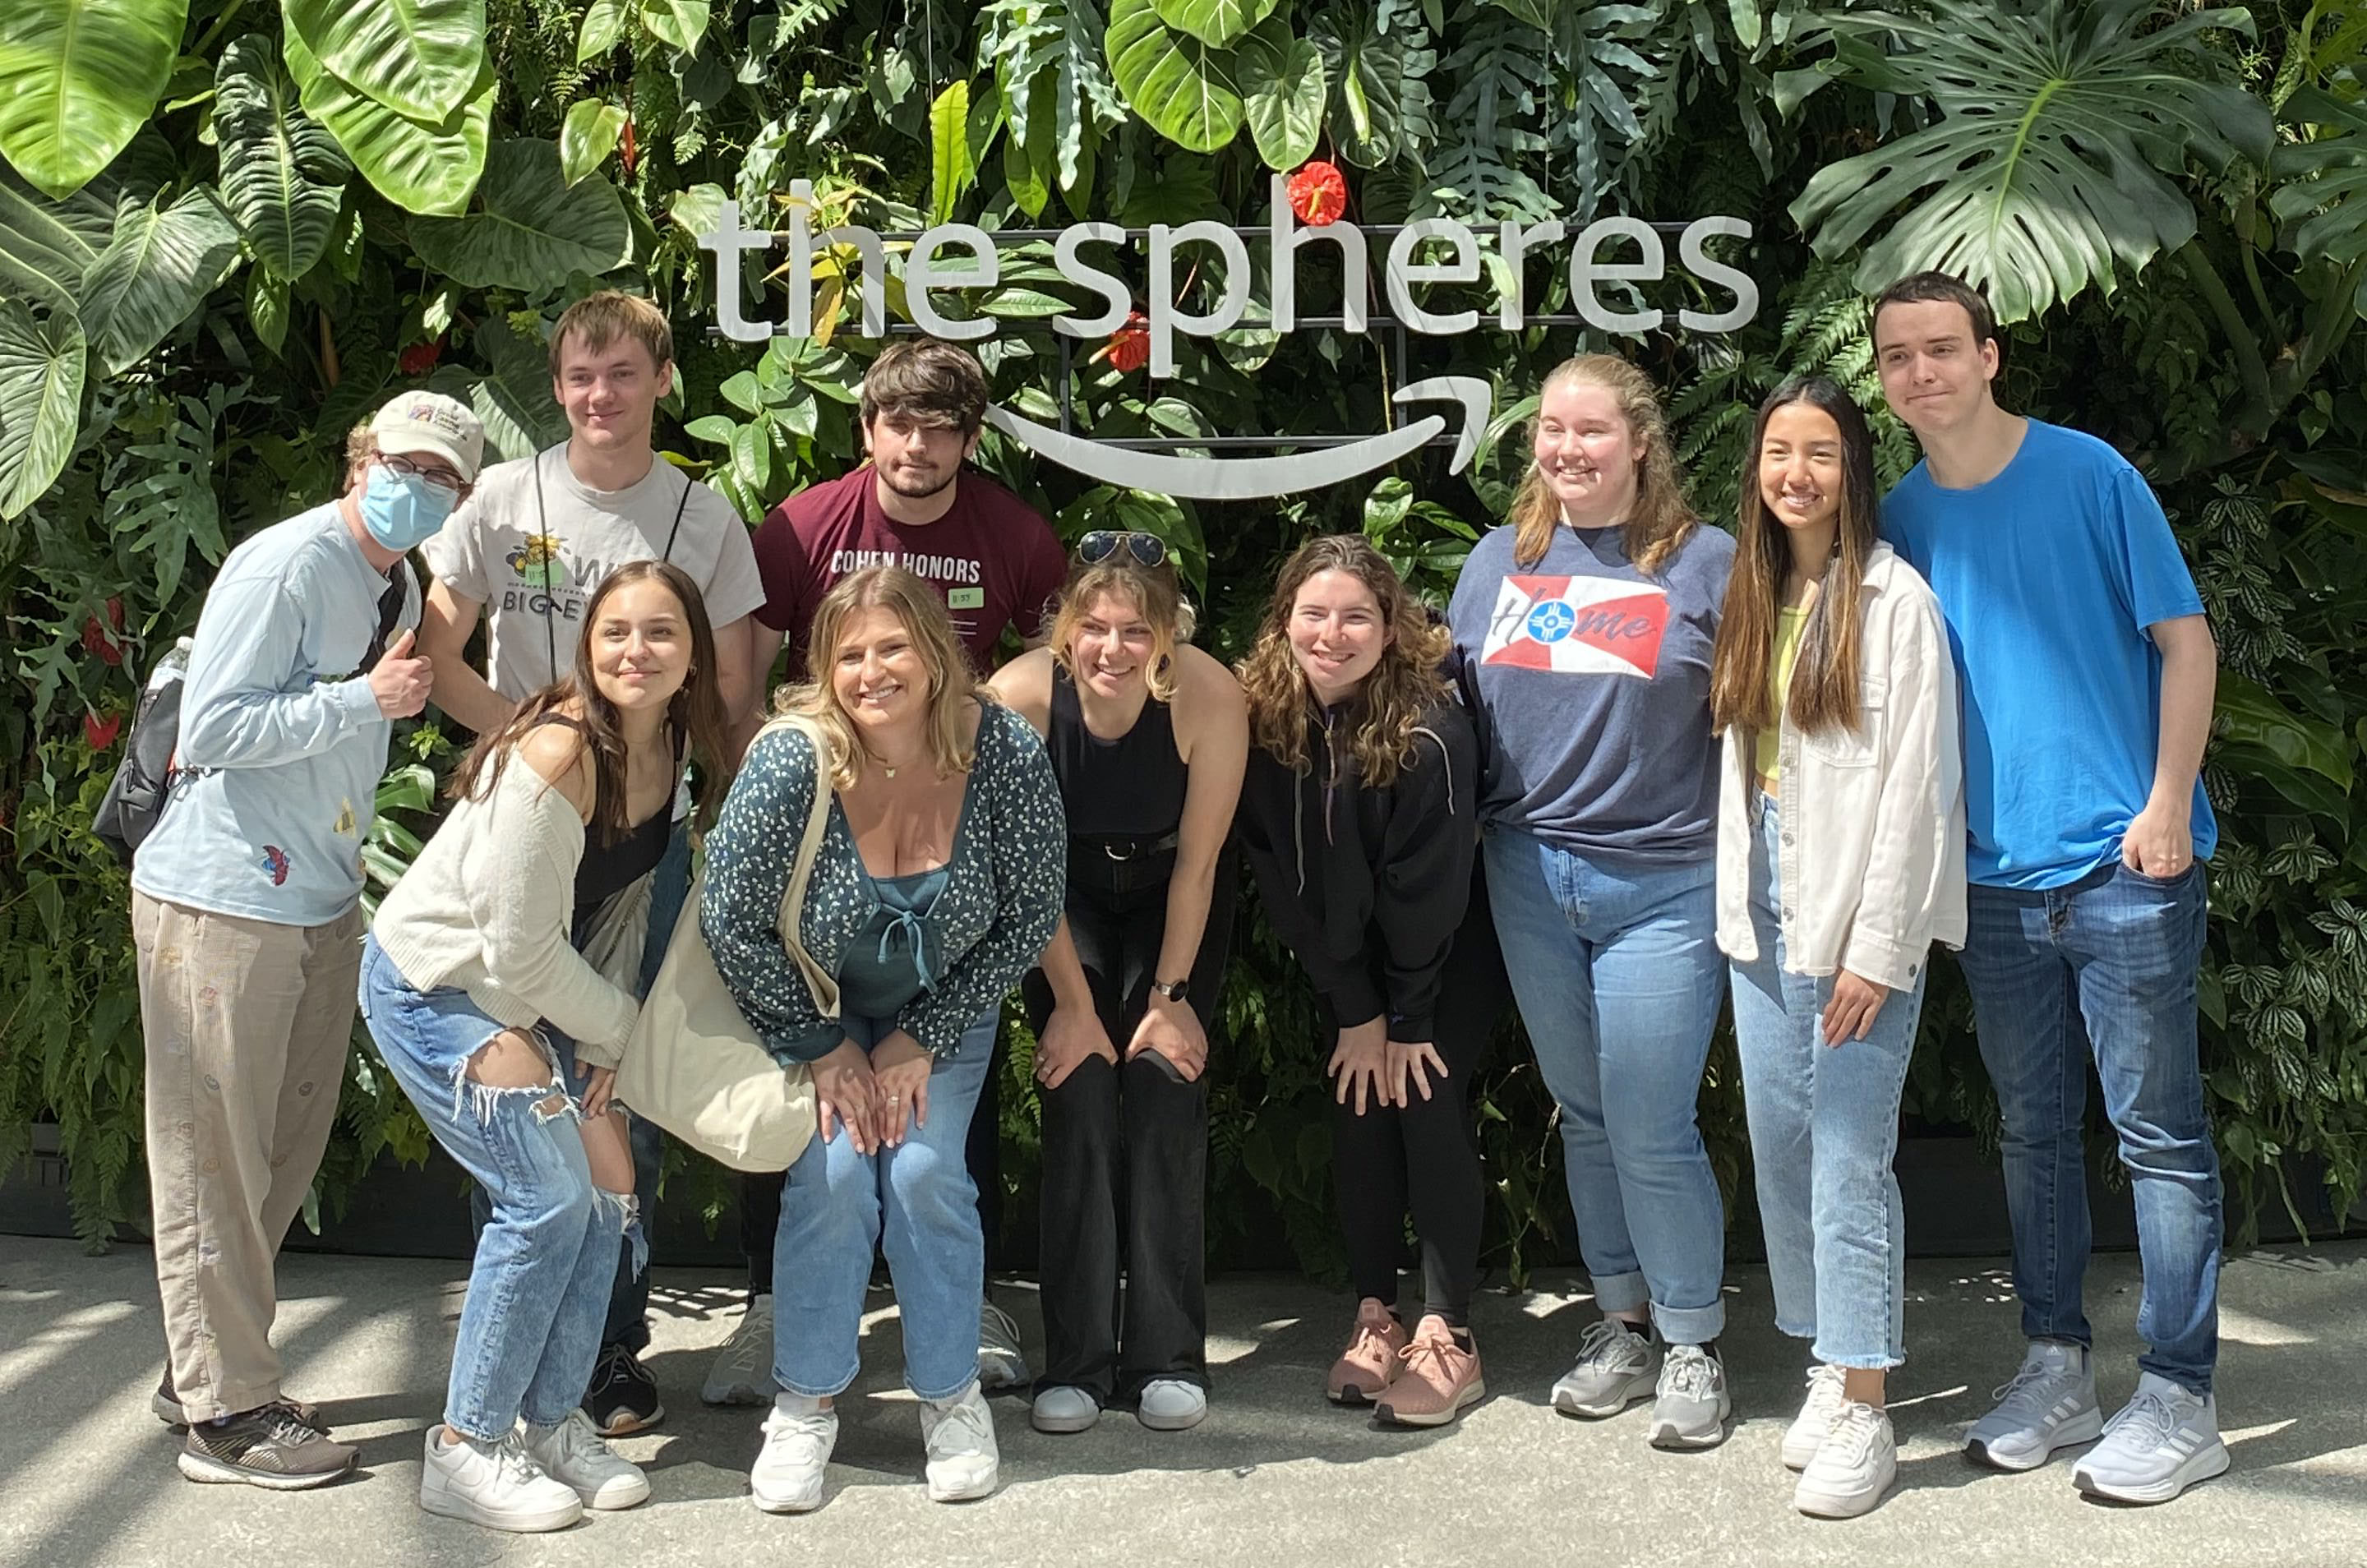 The 2022 Lead for Tomorrow Leadership Academy students posing for a picture at Amazon's The Spheres facility. There are 10 individuals in the photo, posing in front of a sign reading "the spheres" with the Amazon logo beneath and a plant-filled background.